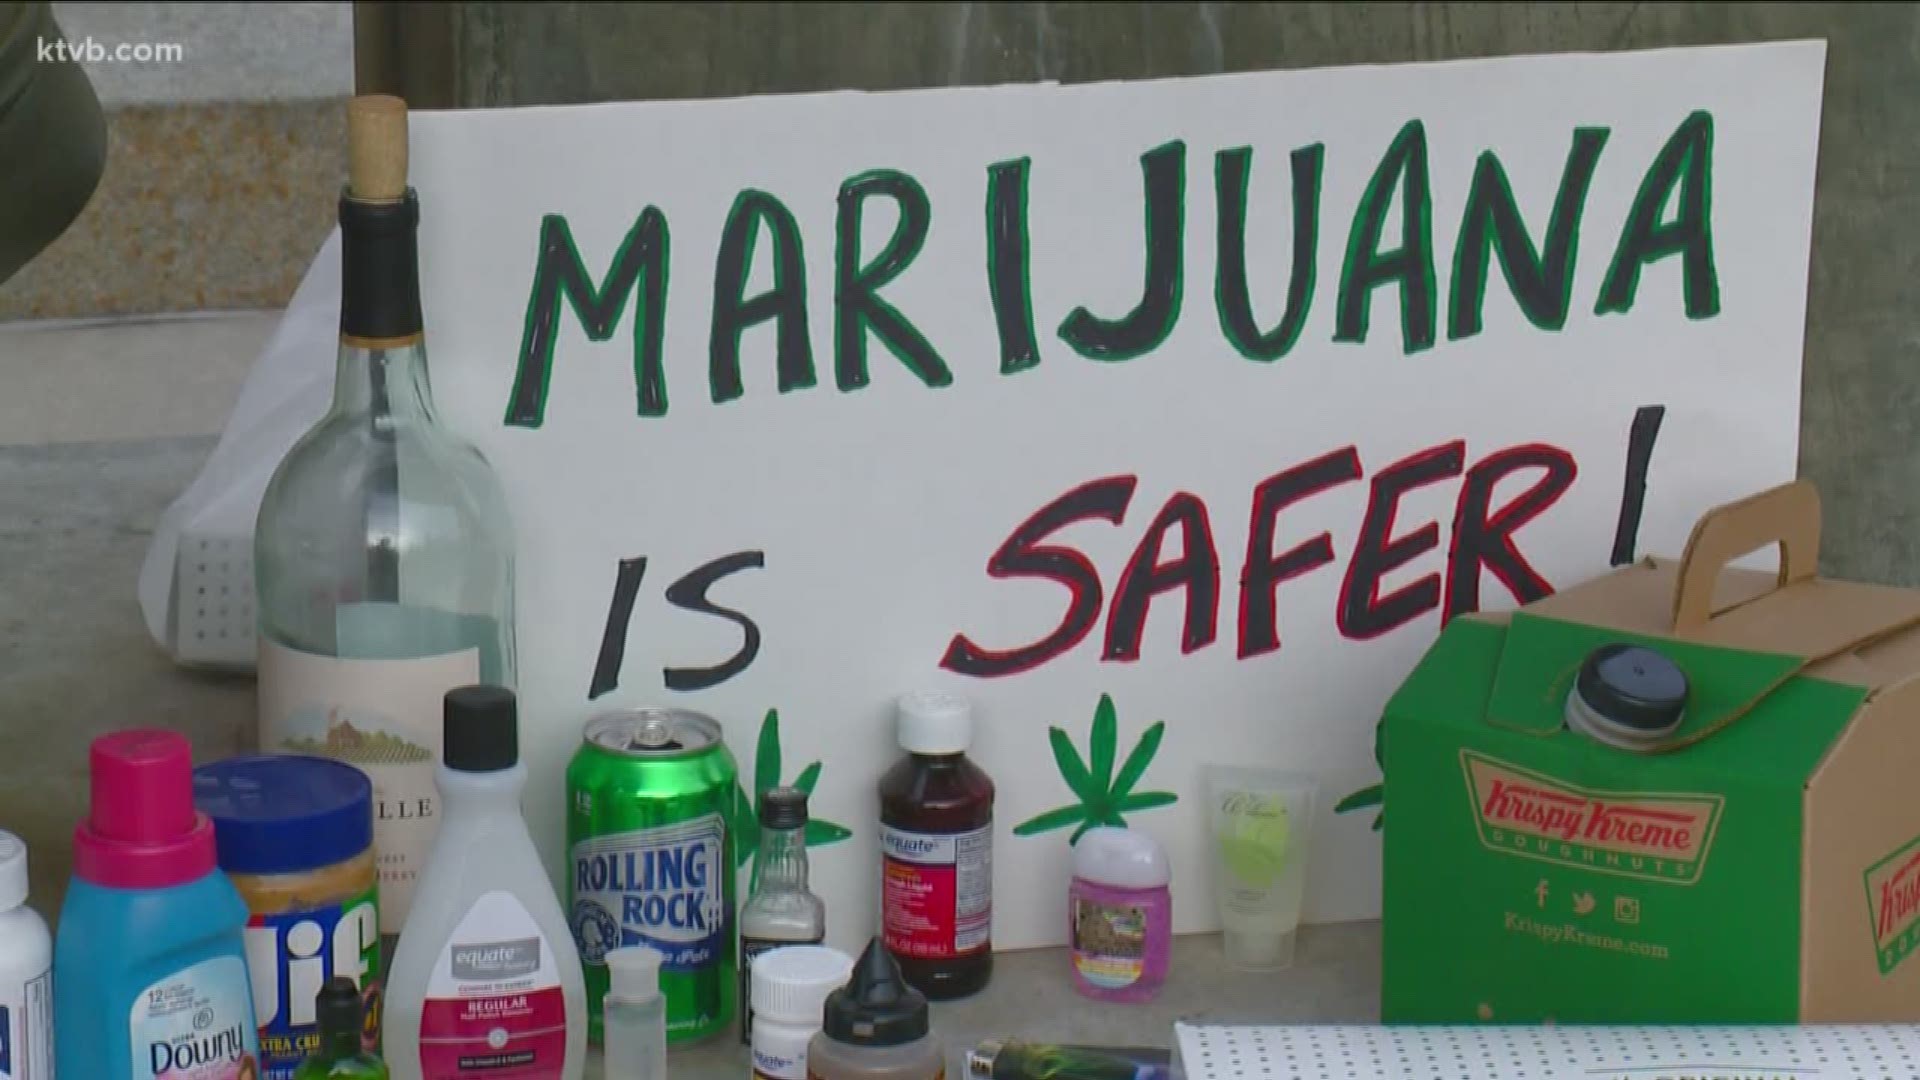 Advocates from Legalize Idaho and Idaho Moms for Marijuana gathered at the State Capitol to call for the legalization of marijuana.